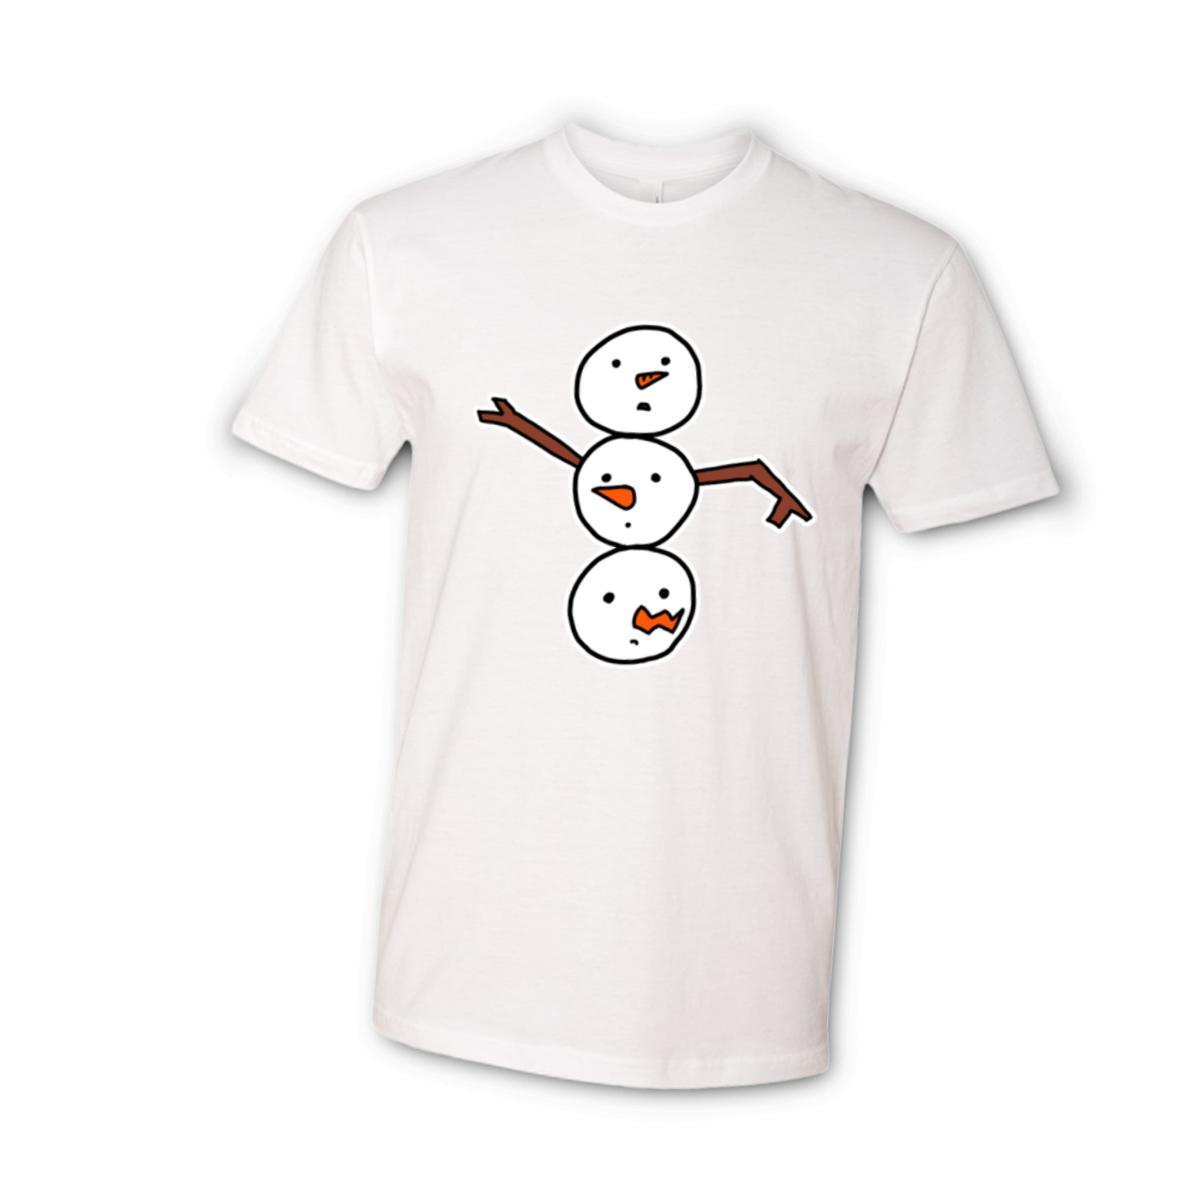 Snowman All Heads Unisex Tee Large white